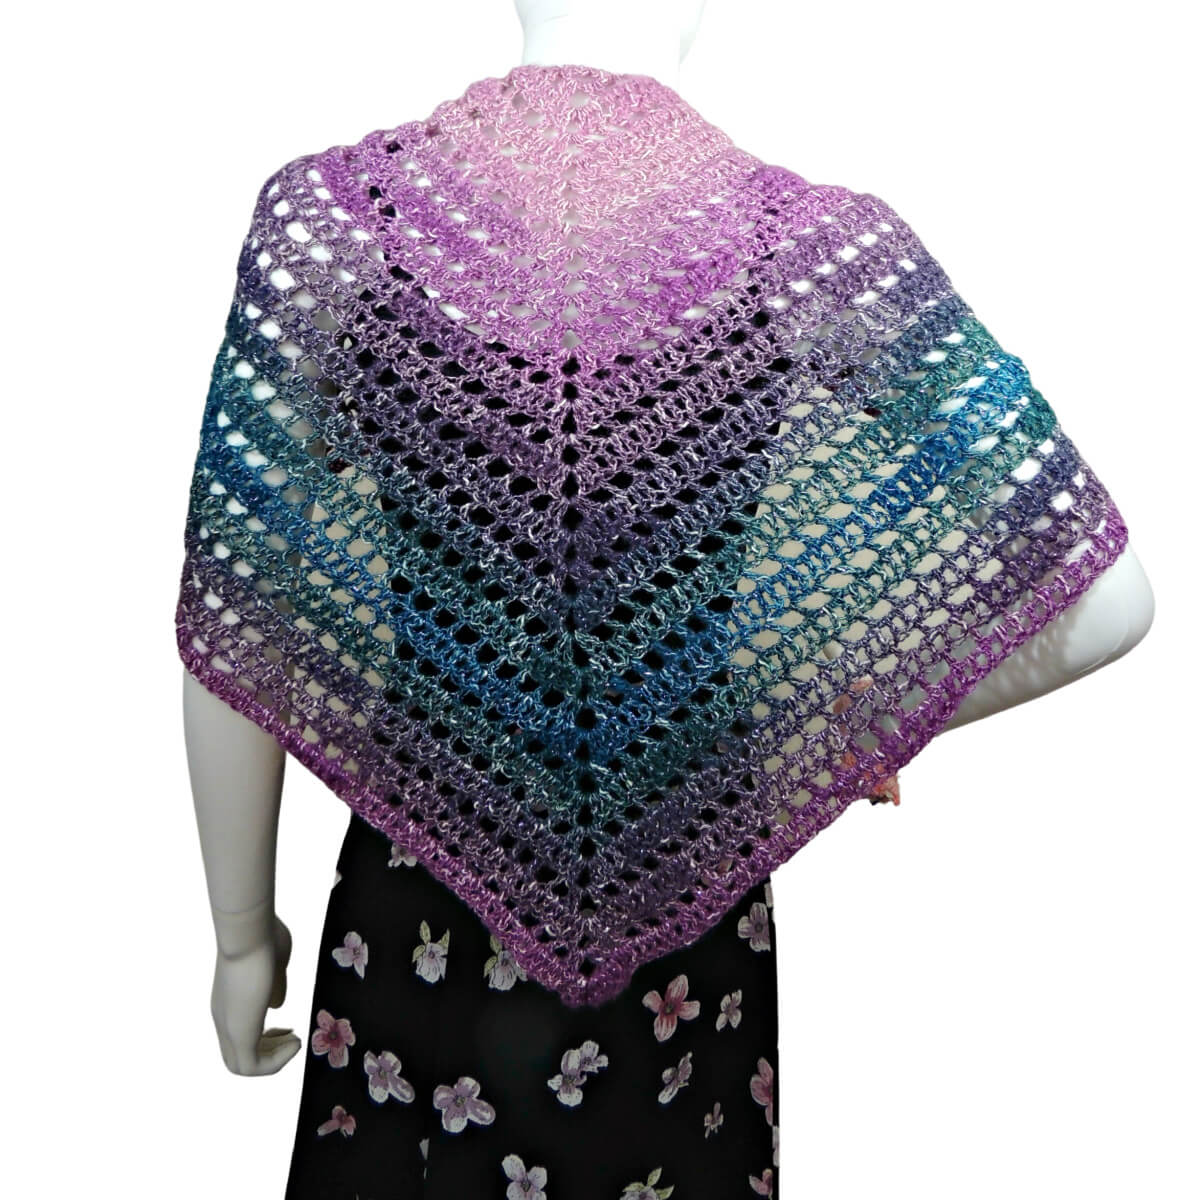 Back of a white mannequin in a black tank top, black skirt, and a triangular crochet shawl that changes colors through pink, purple, green, and blue. Shawl alternates between rows of solid stitches and rows of net or eyehole stitches. The shawl is laying flat across the back so the stitching can clearly be seen.